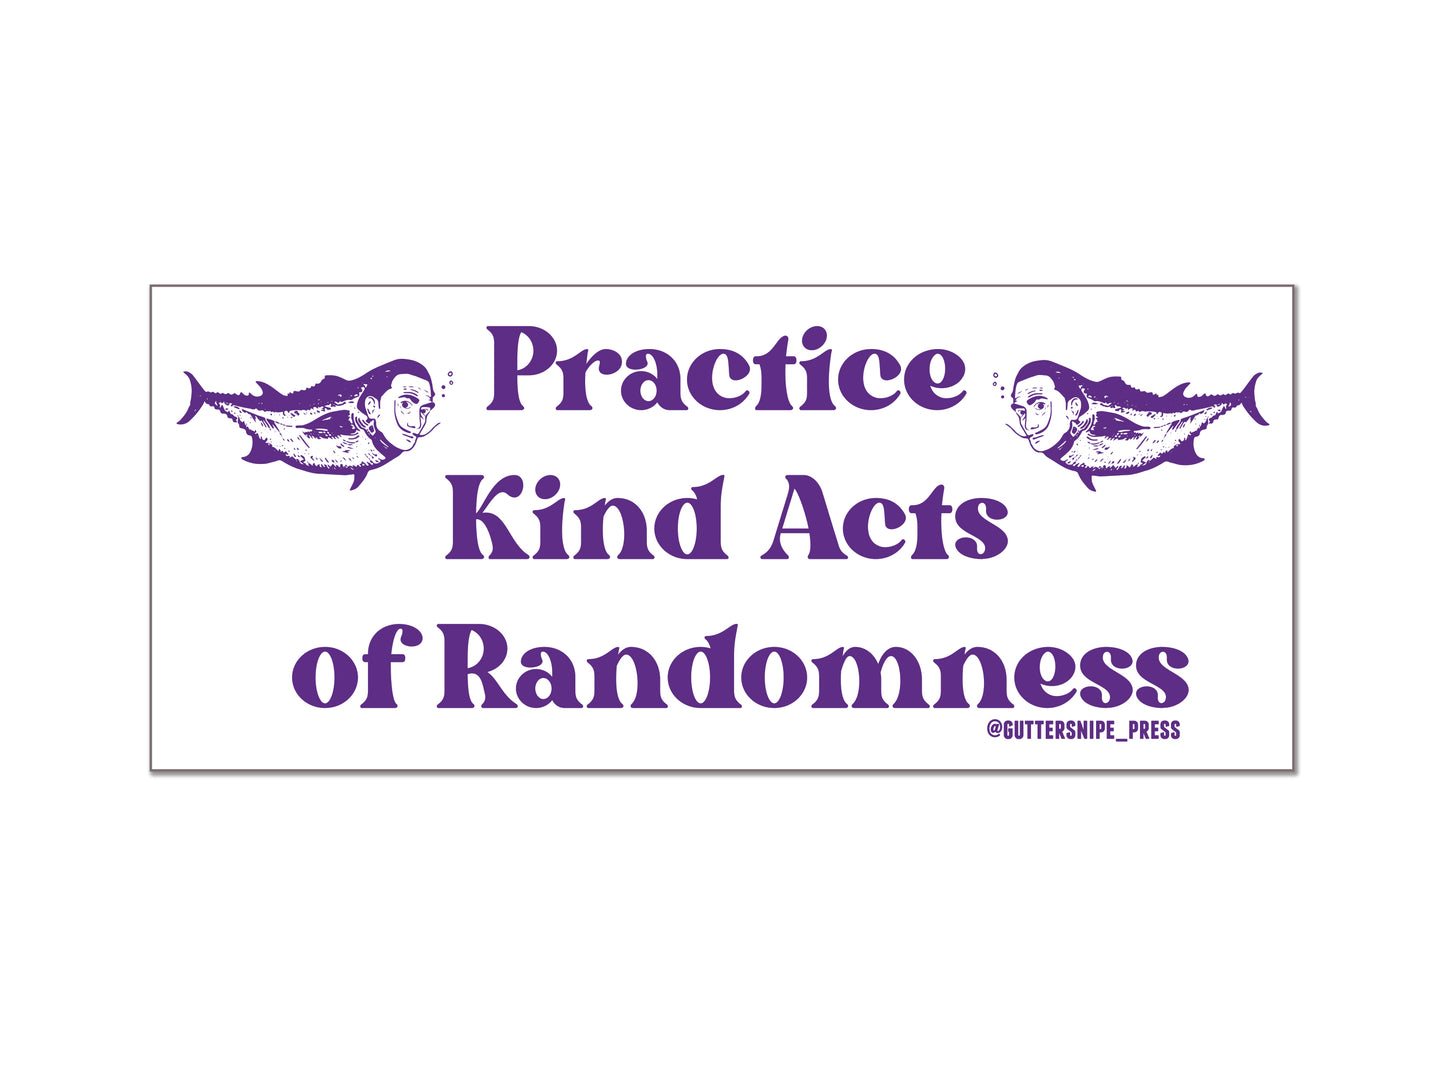 Kind Acts of Randomness Sticker